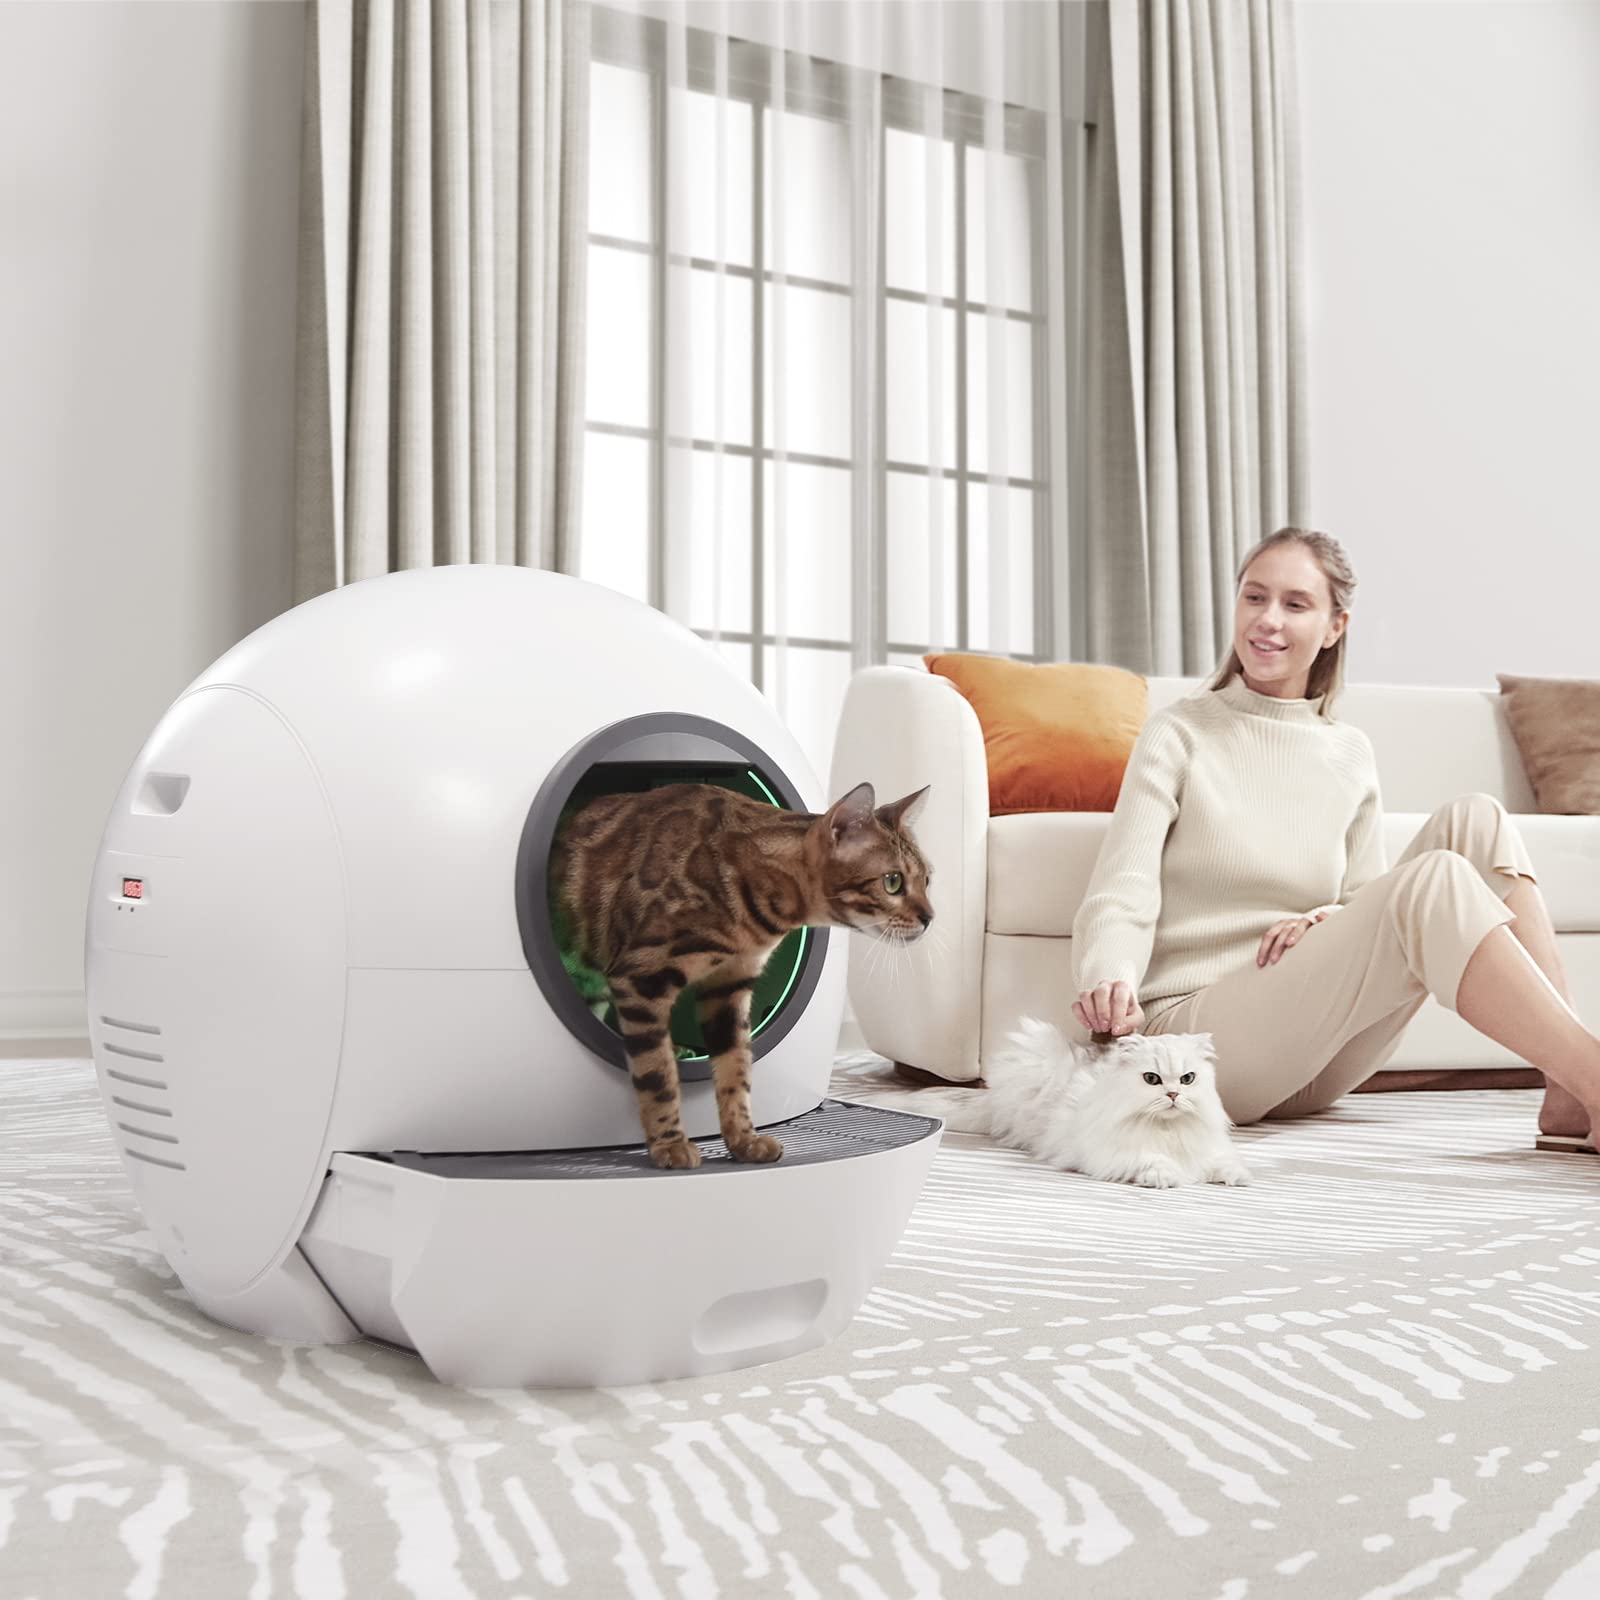 Automatic Self-Cleaning Cat Litter Box - Happy2Cats